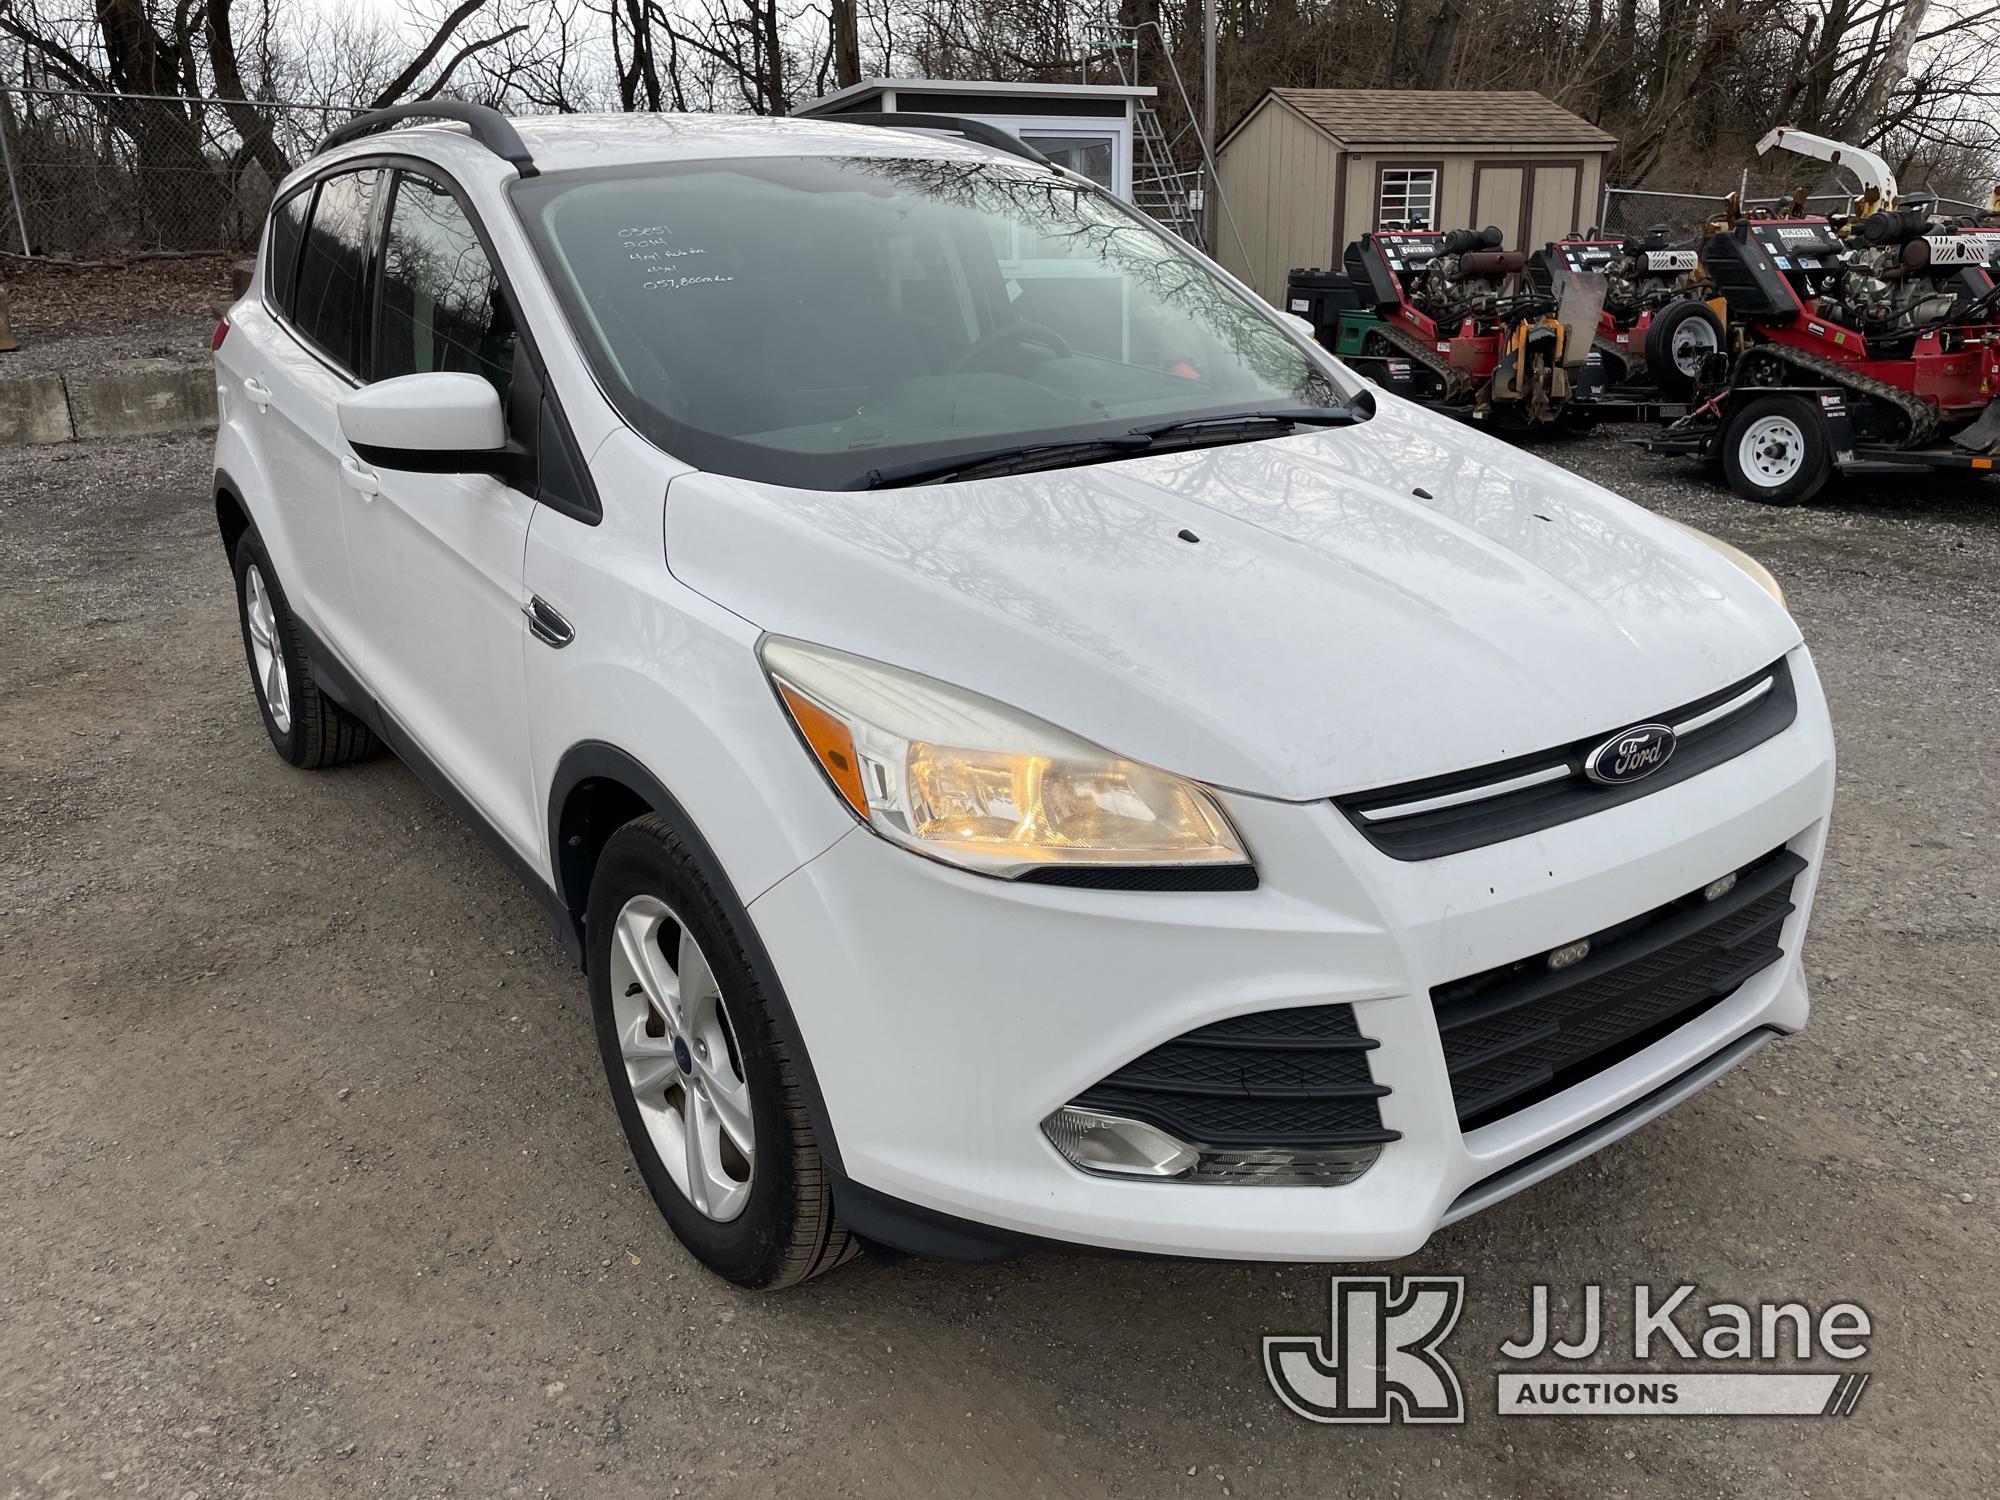 (Plymouth Meeting, PA) 2014 Ford Escape 4x4 4-Door Sport Utility Vehicle Runs & Moves, Minor Body &